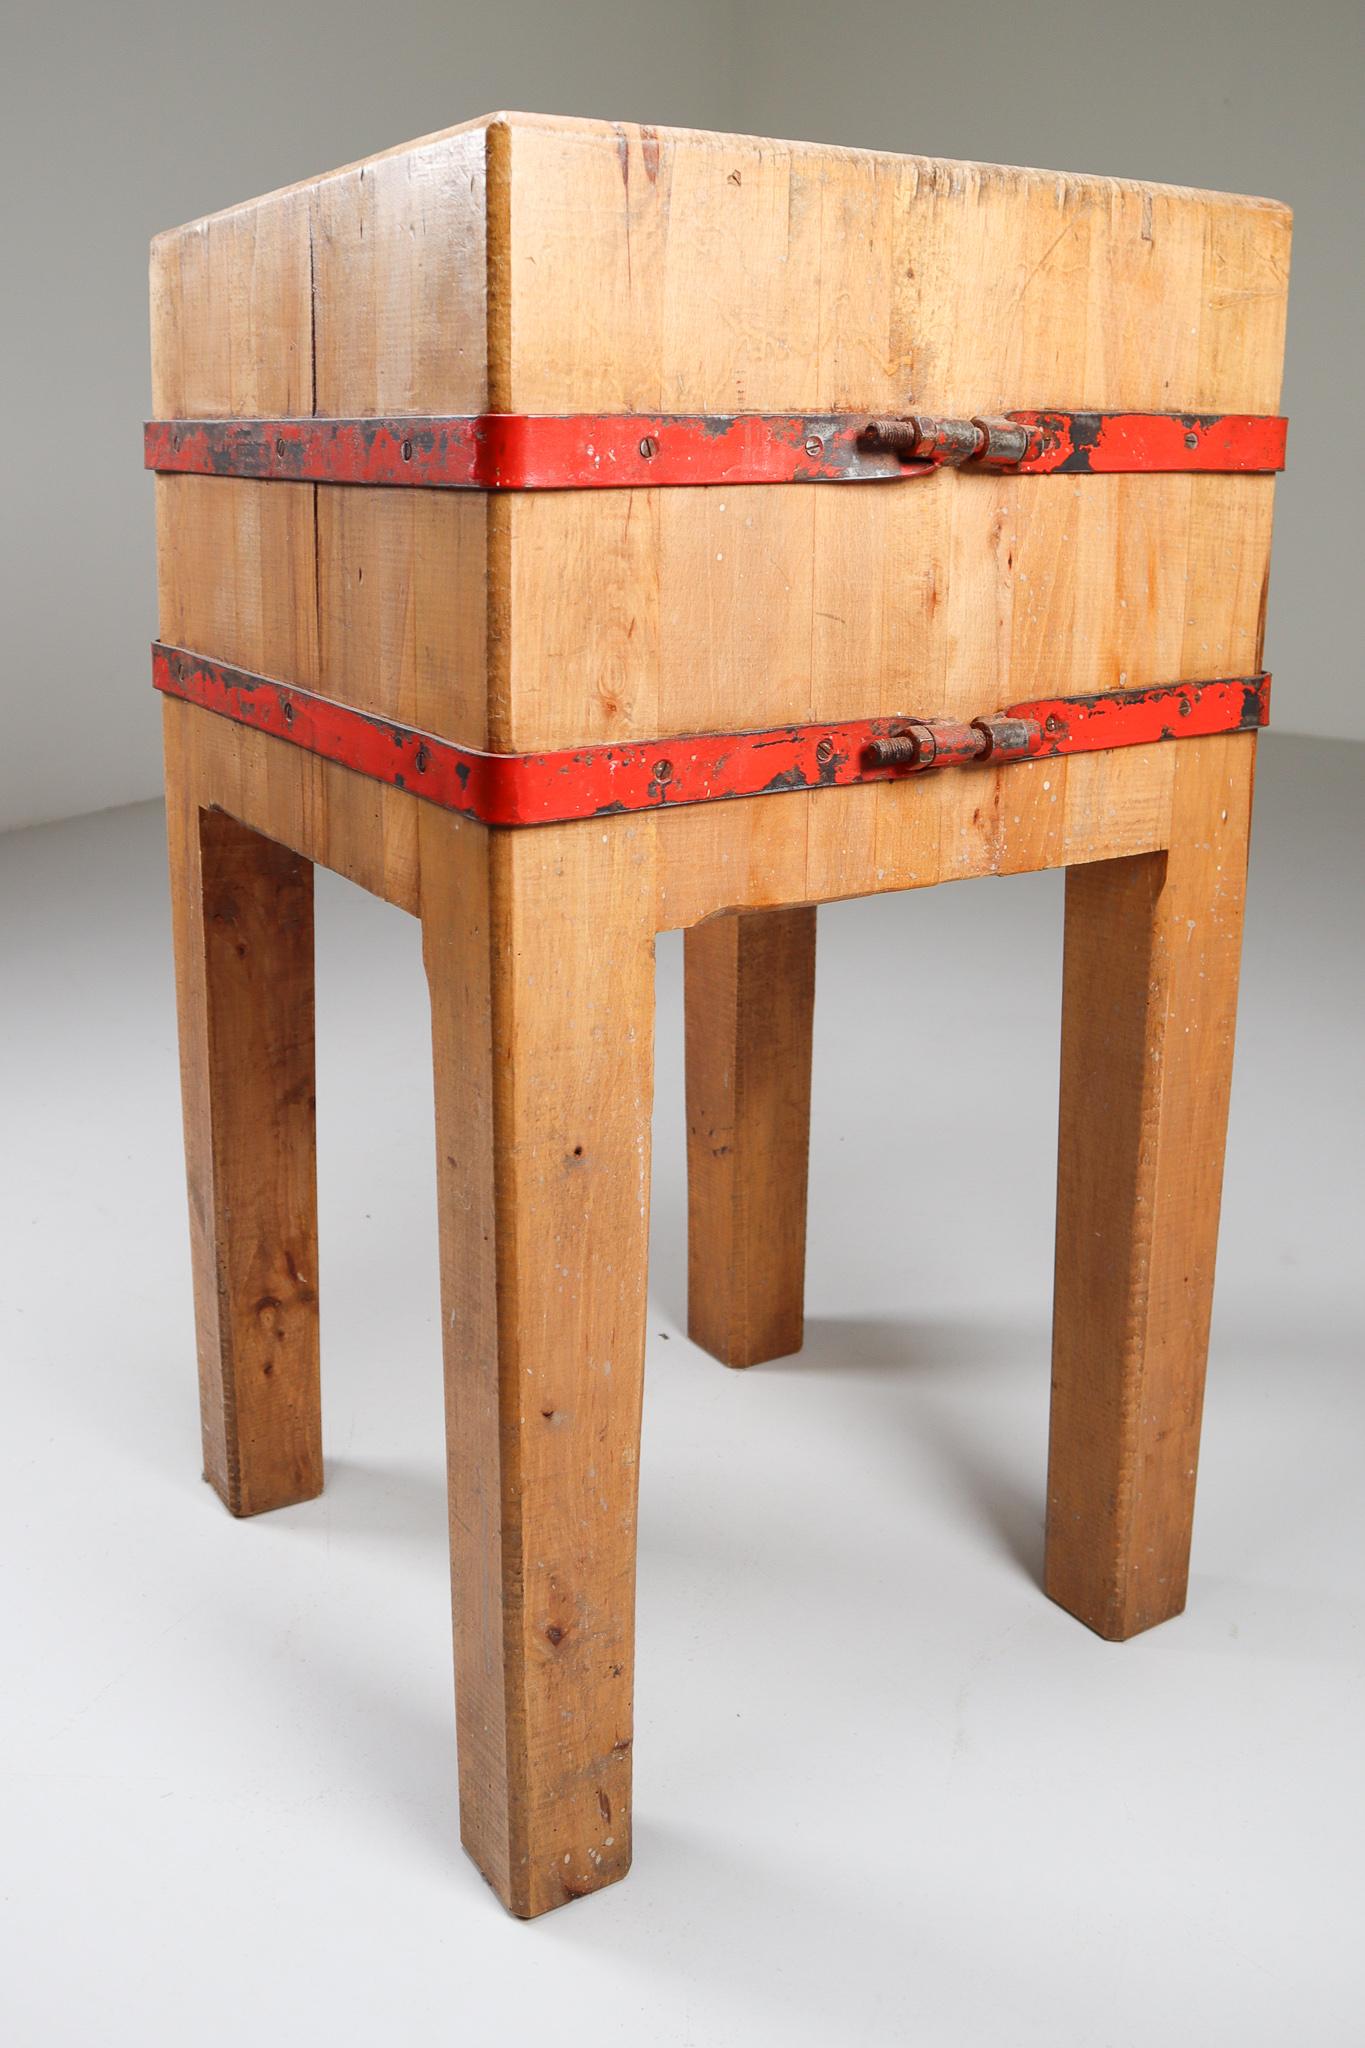 A handsome French butcher's chopping block or table, from the 19th century, featuring a large, square sloping block or slab of iron-bound wood set upon a four-legged support stand of beech.